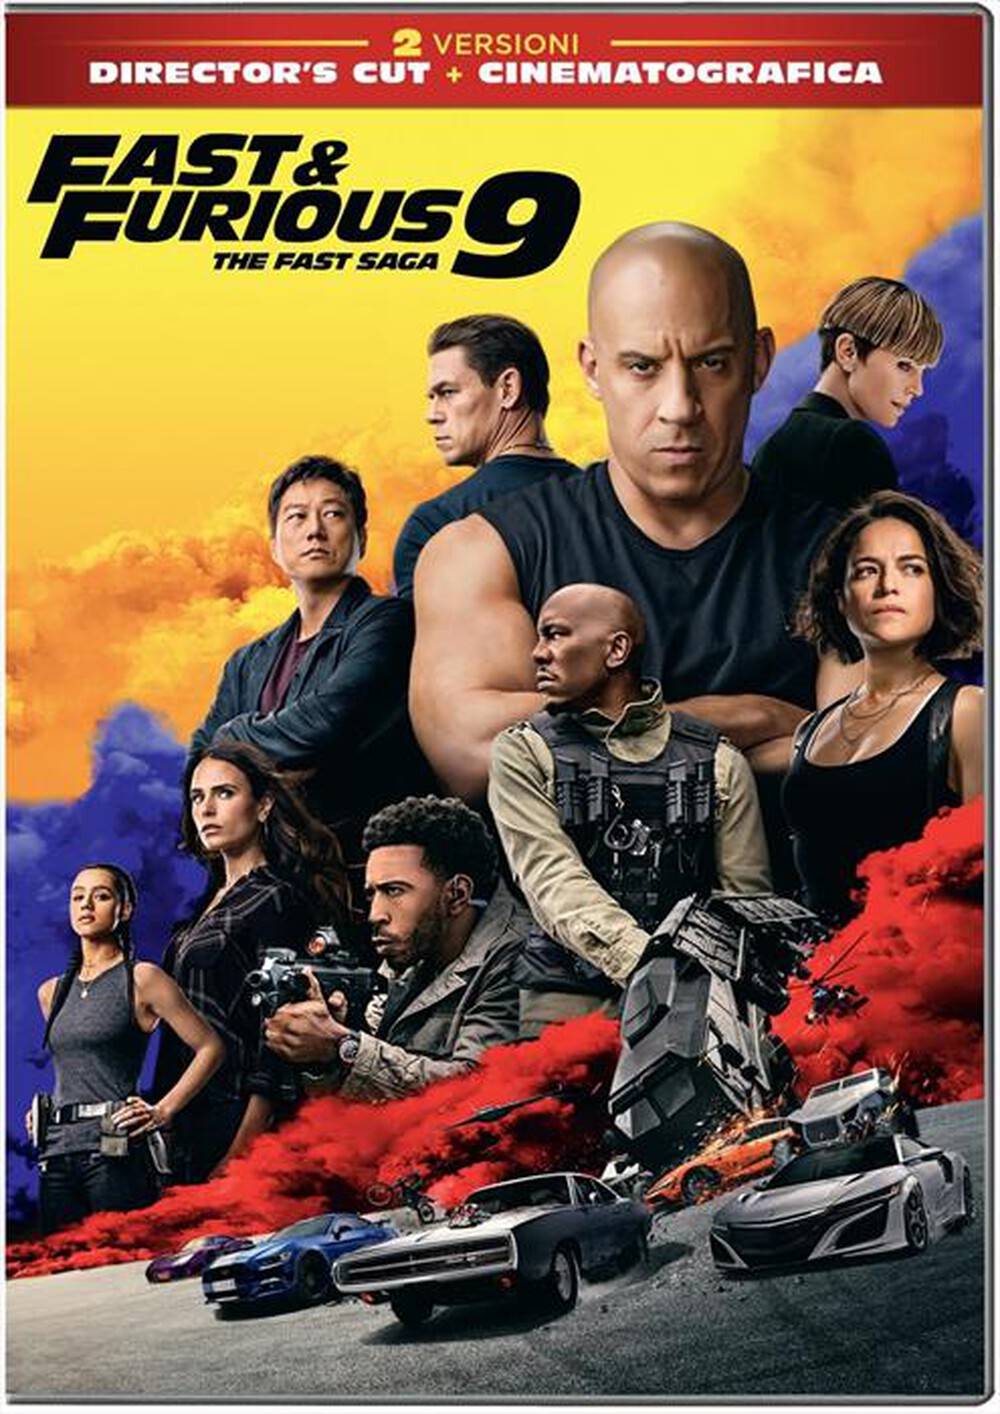 "WARNER HOME VIDEO - Fast And Furious 9"